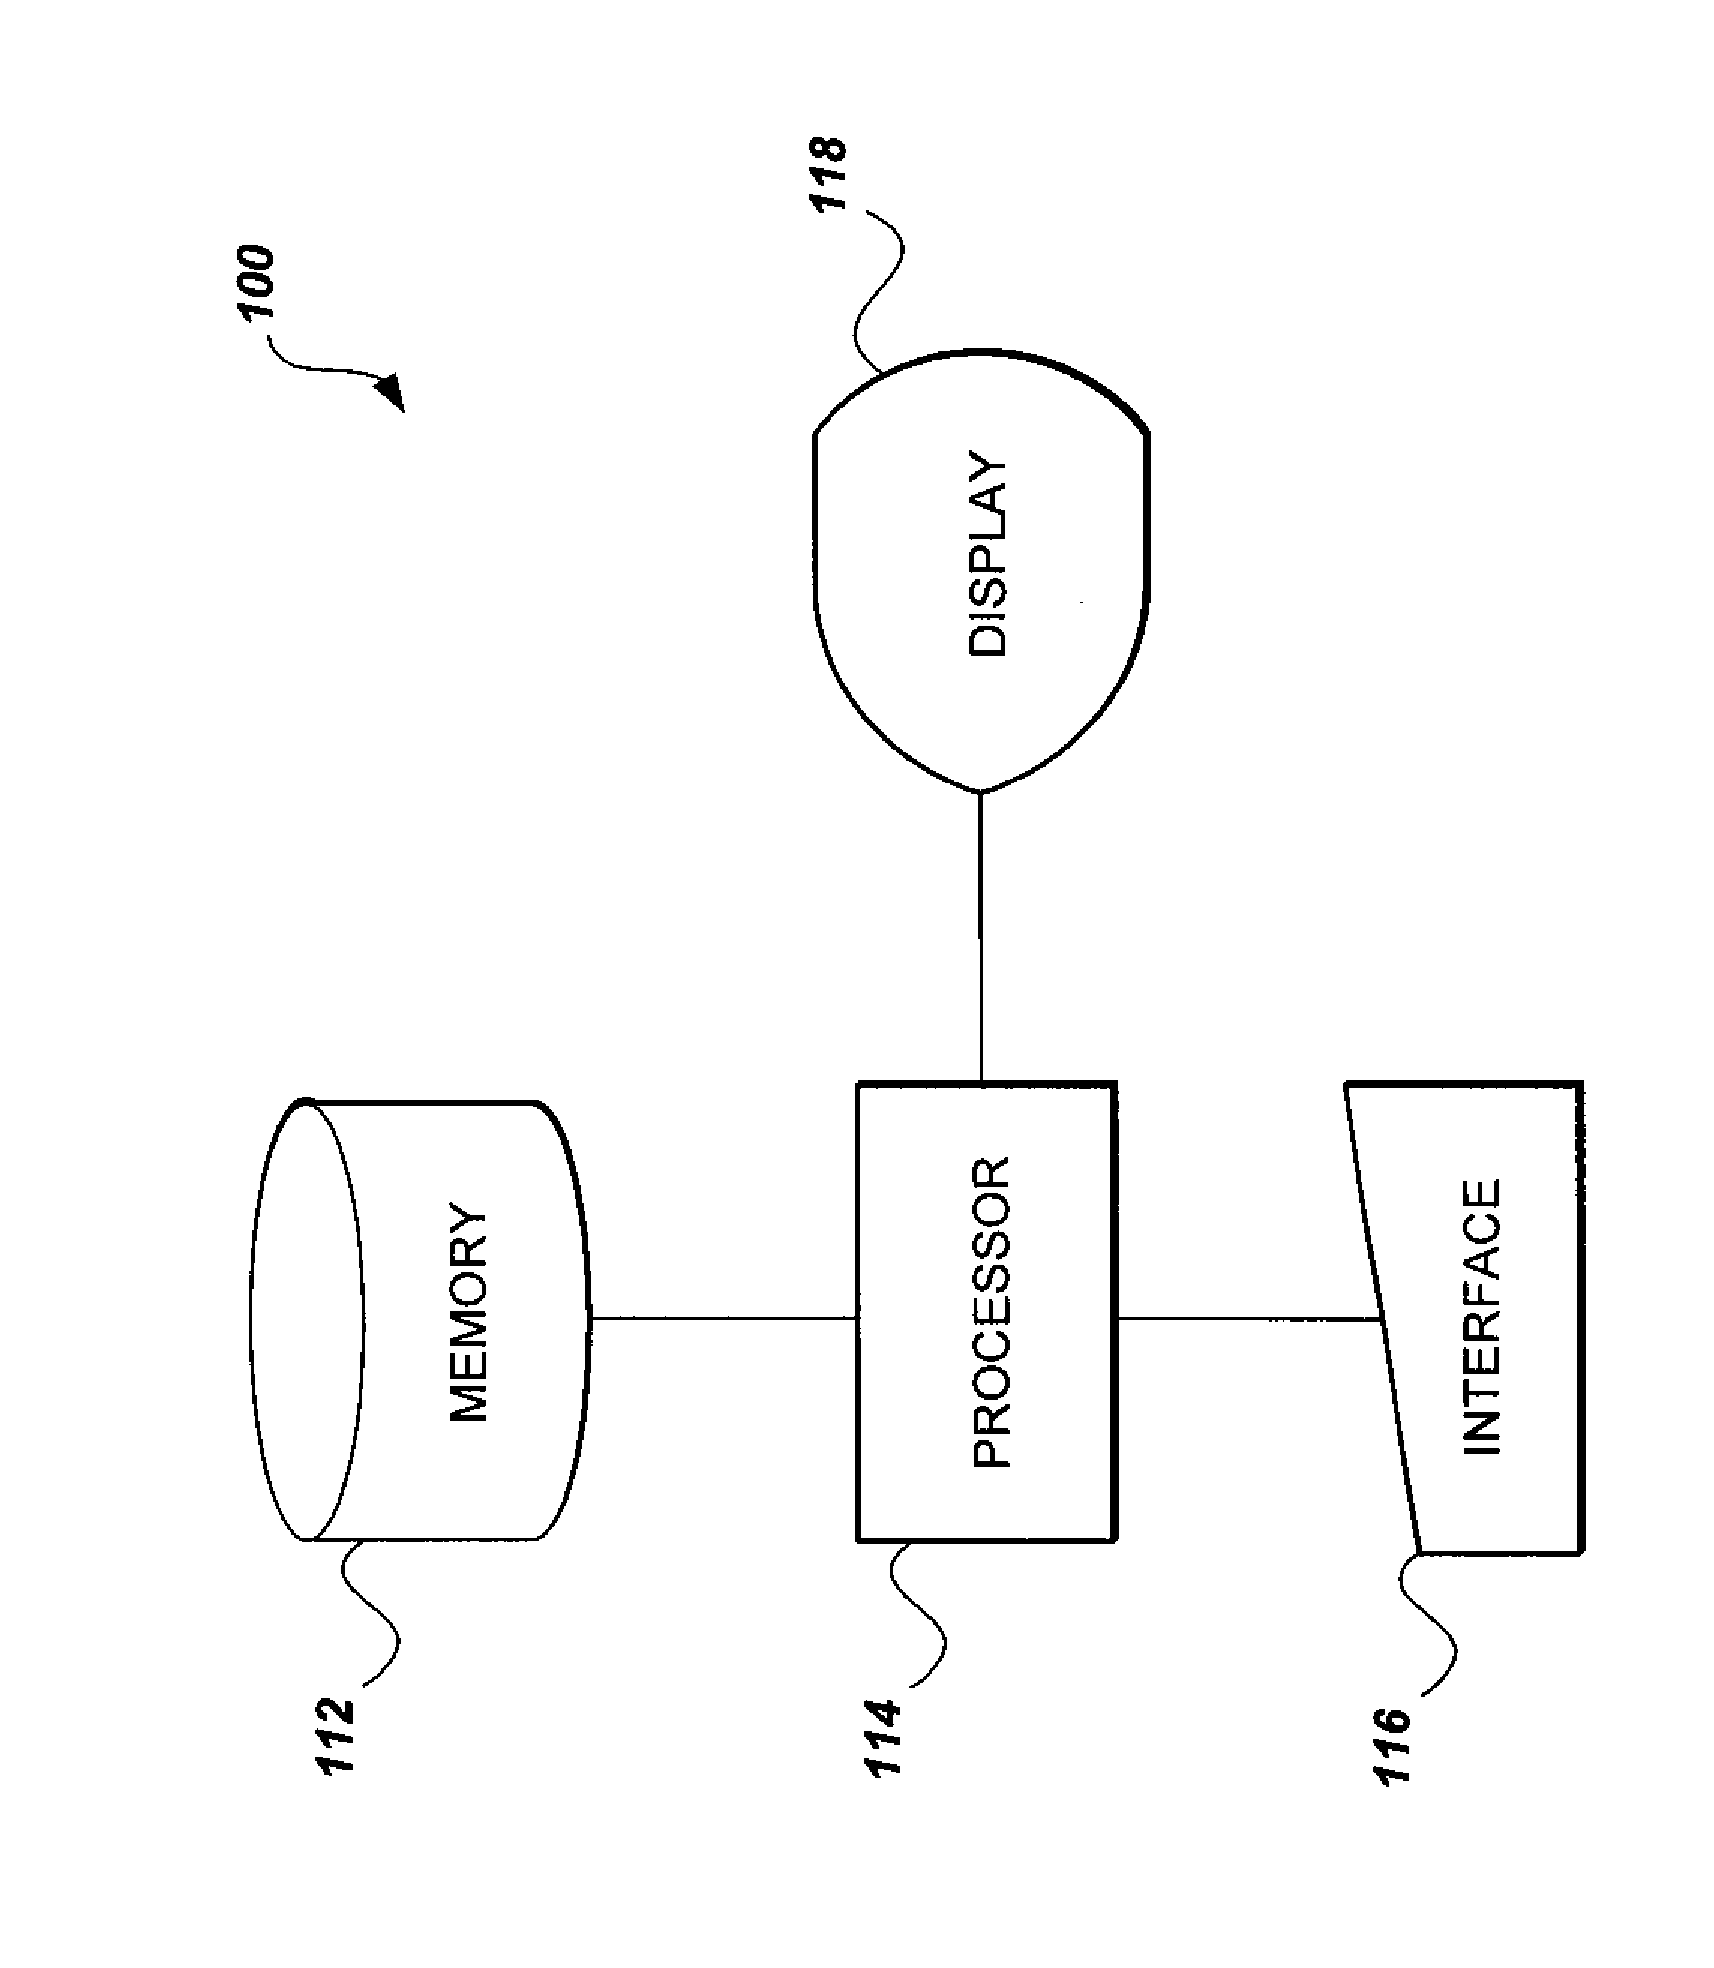 Method of performing xz-elliptic curve cryptography for use with network securtiy protocols